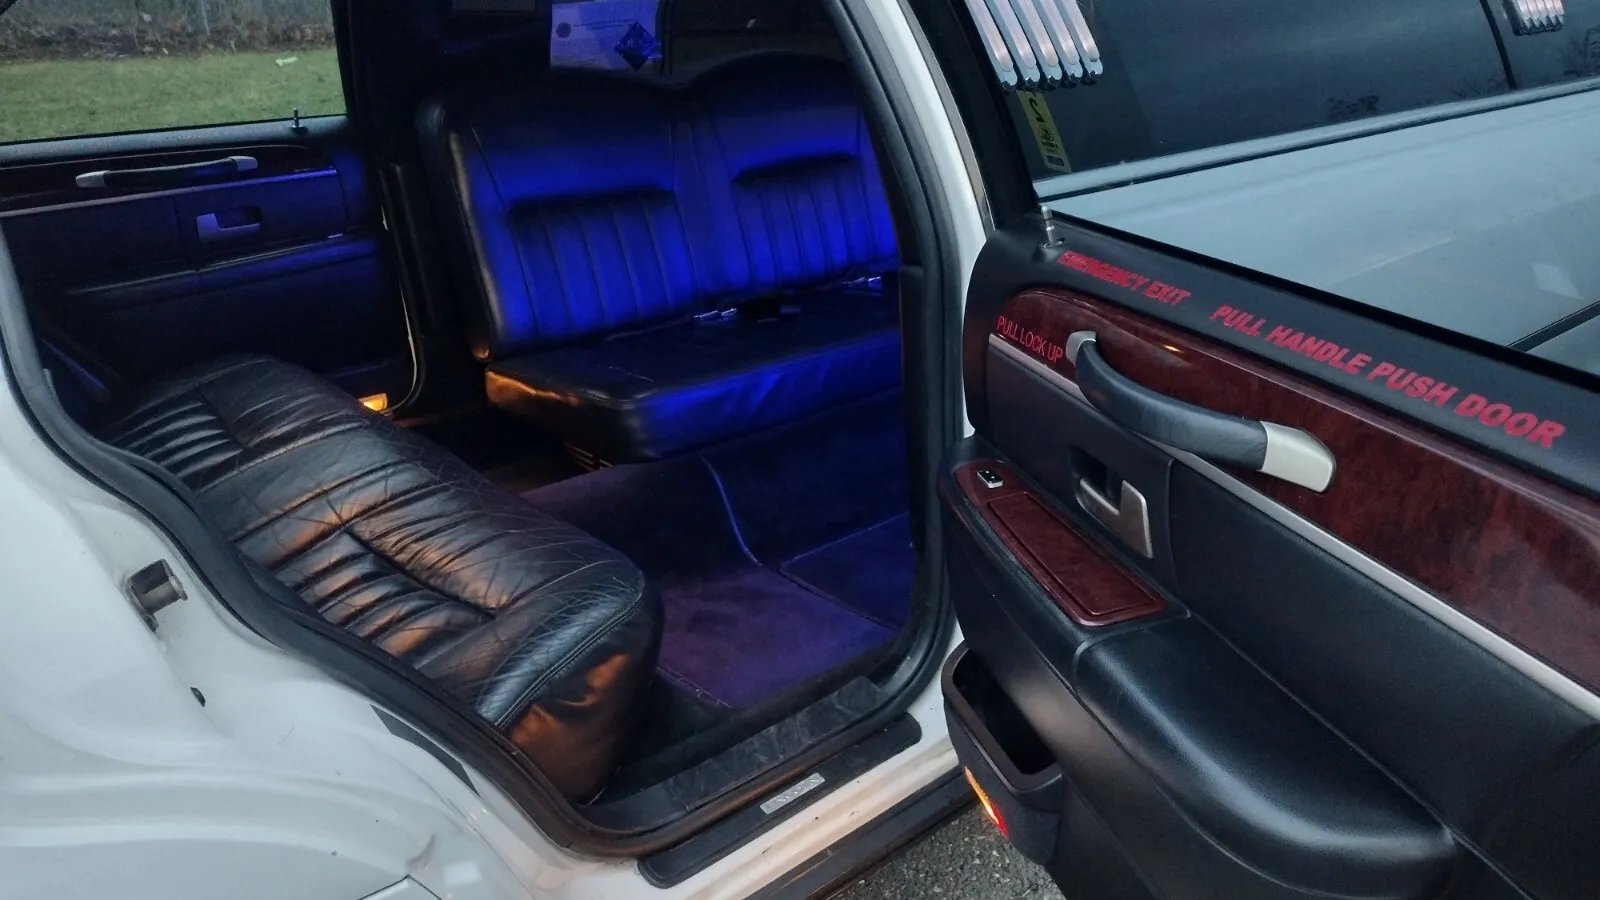 2005 Lincoln Town Car limousine [well maintained]